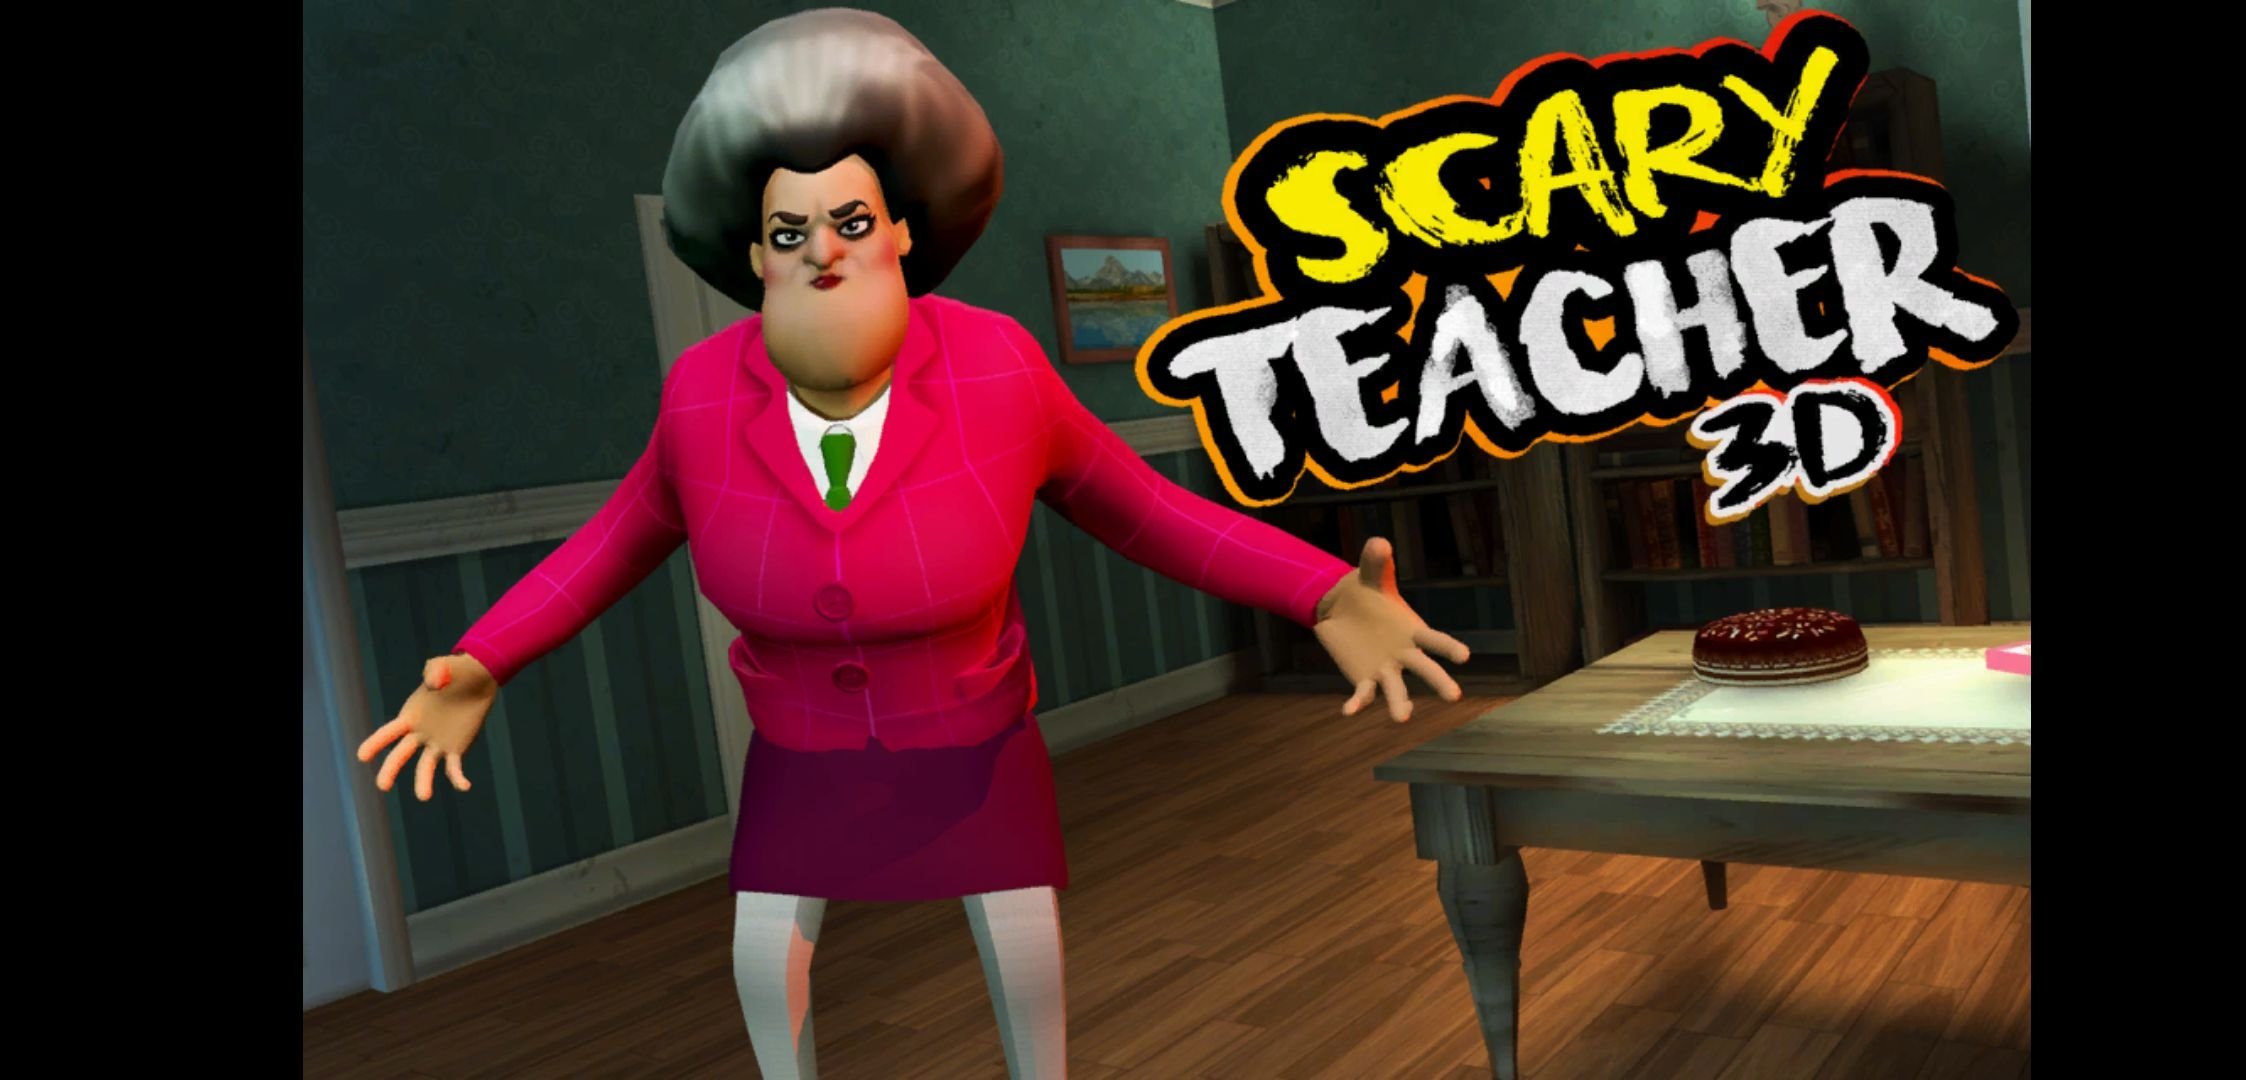 Scary Teacher 3D APK Download for Android Free